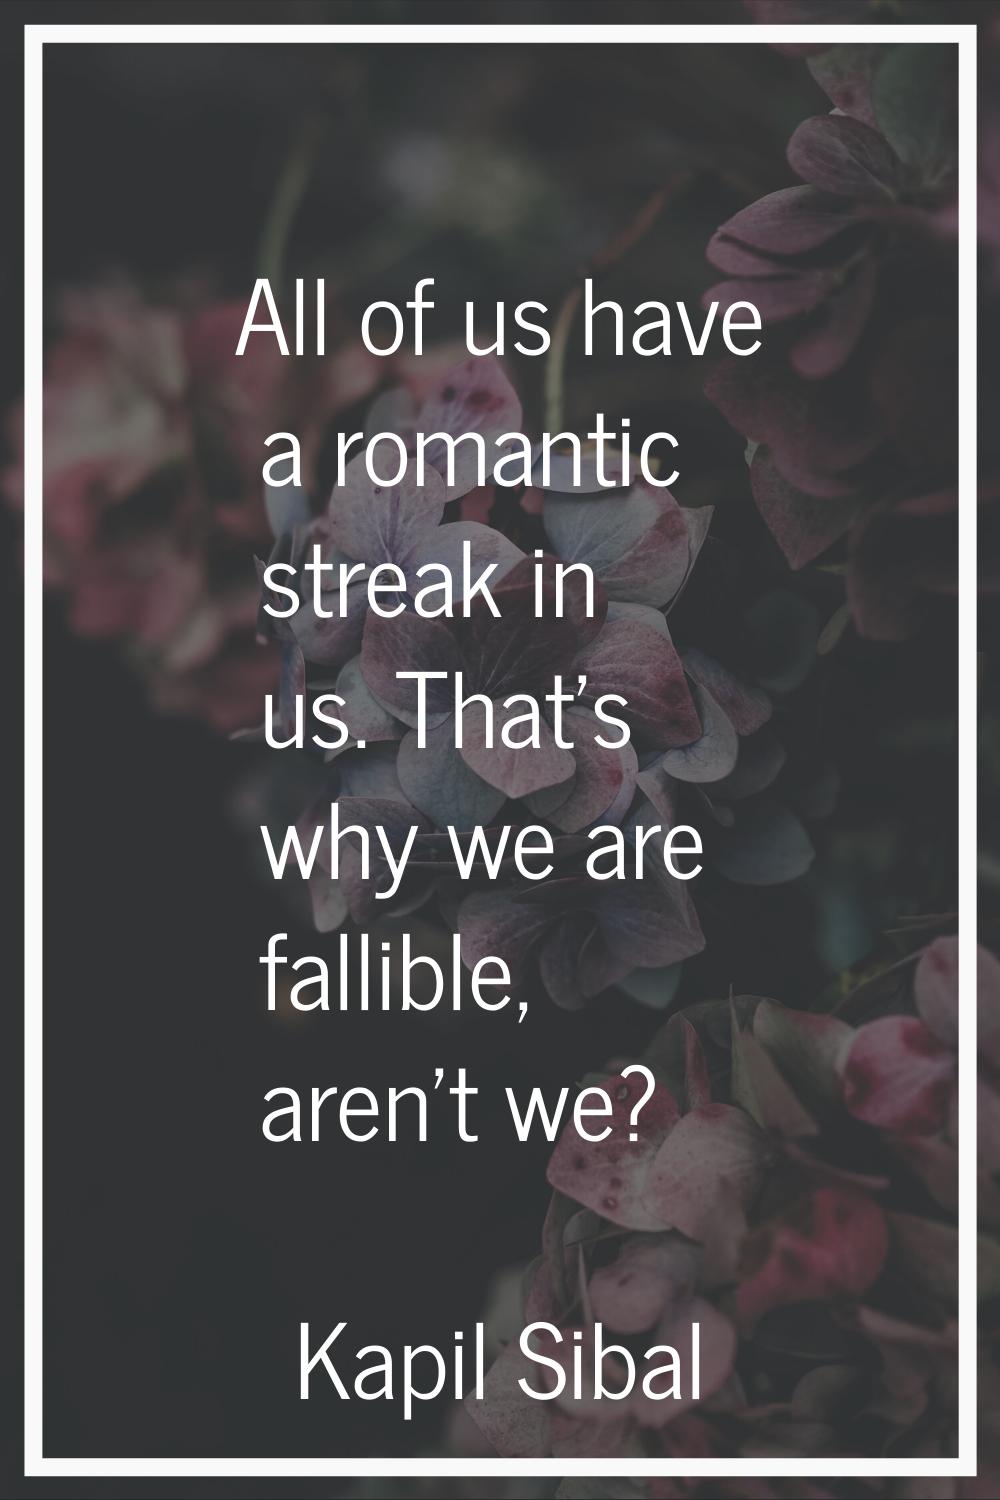 All of us have a romantic streak in us. That's why we are fallible, aren't we?